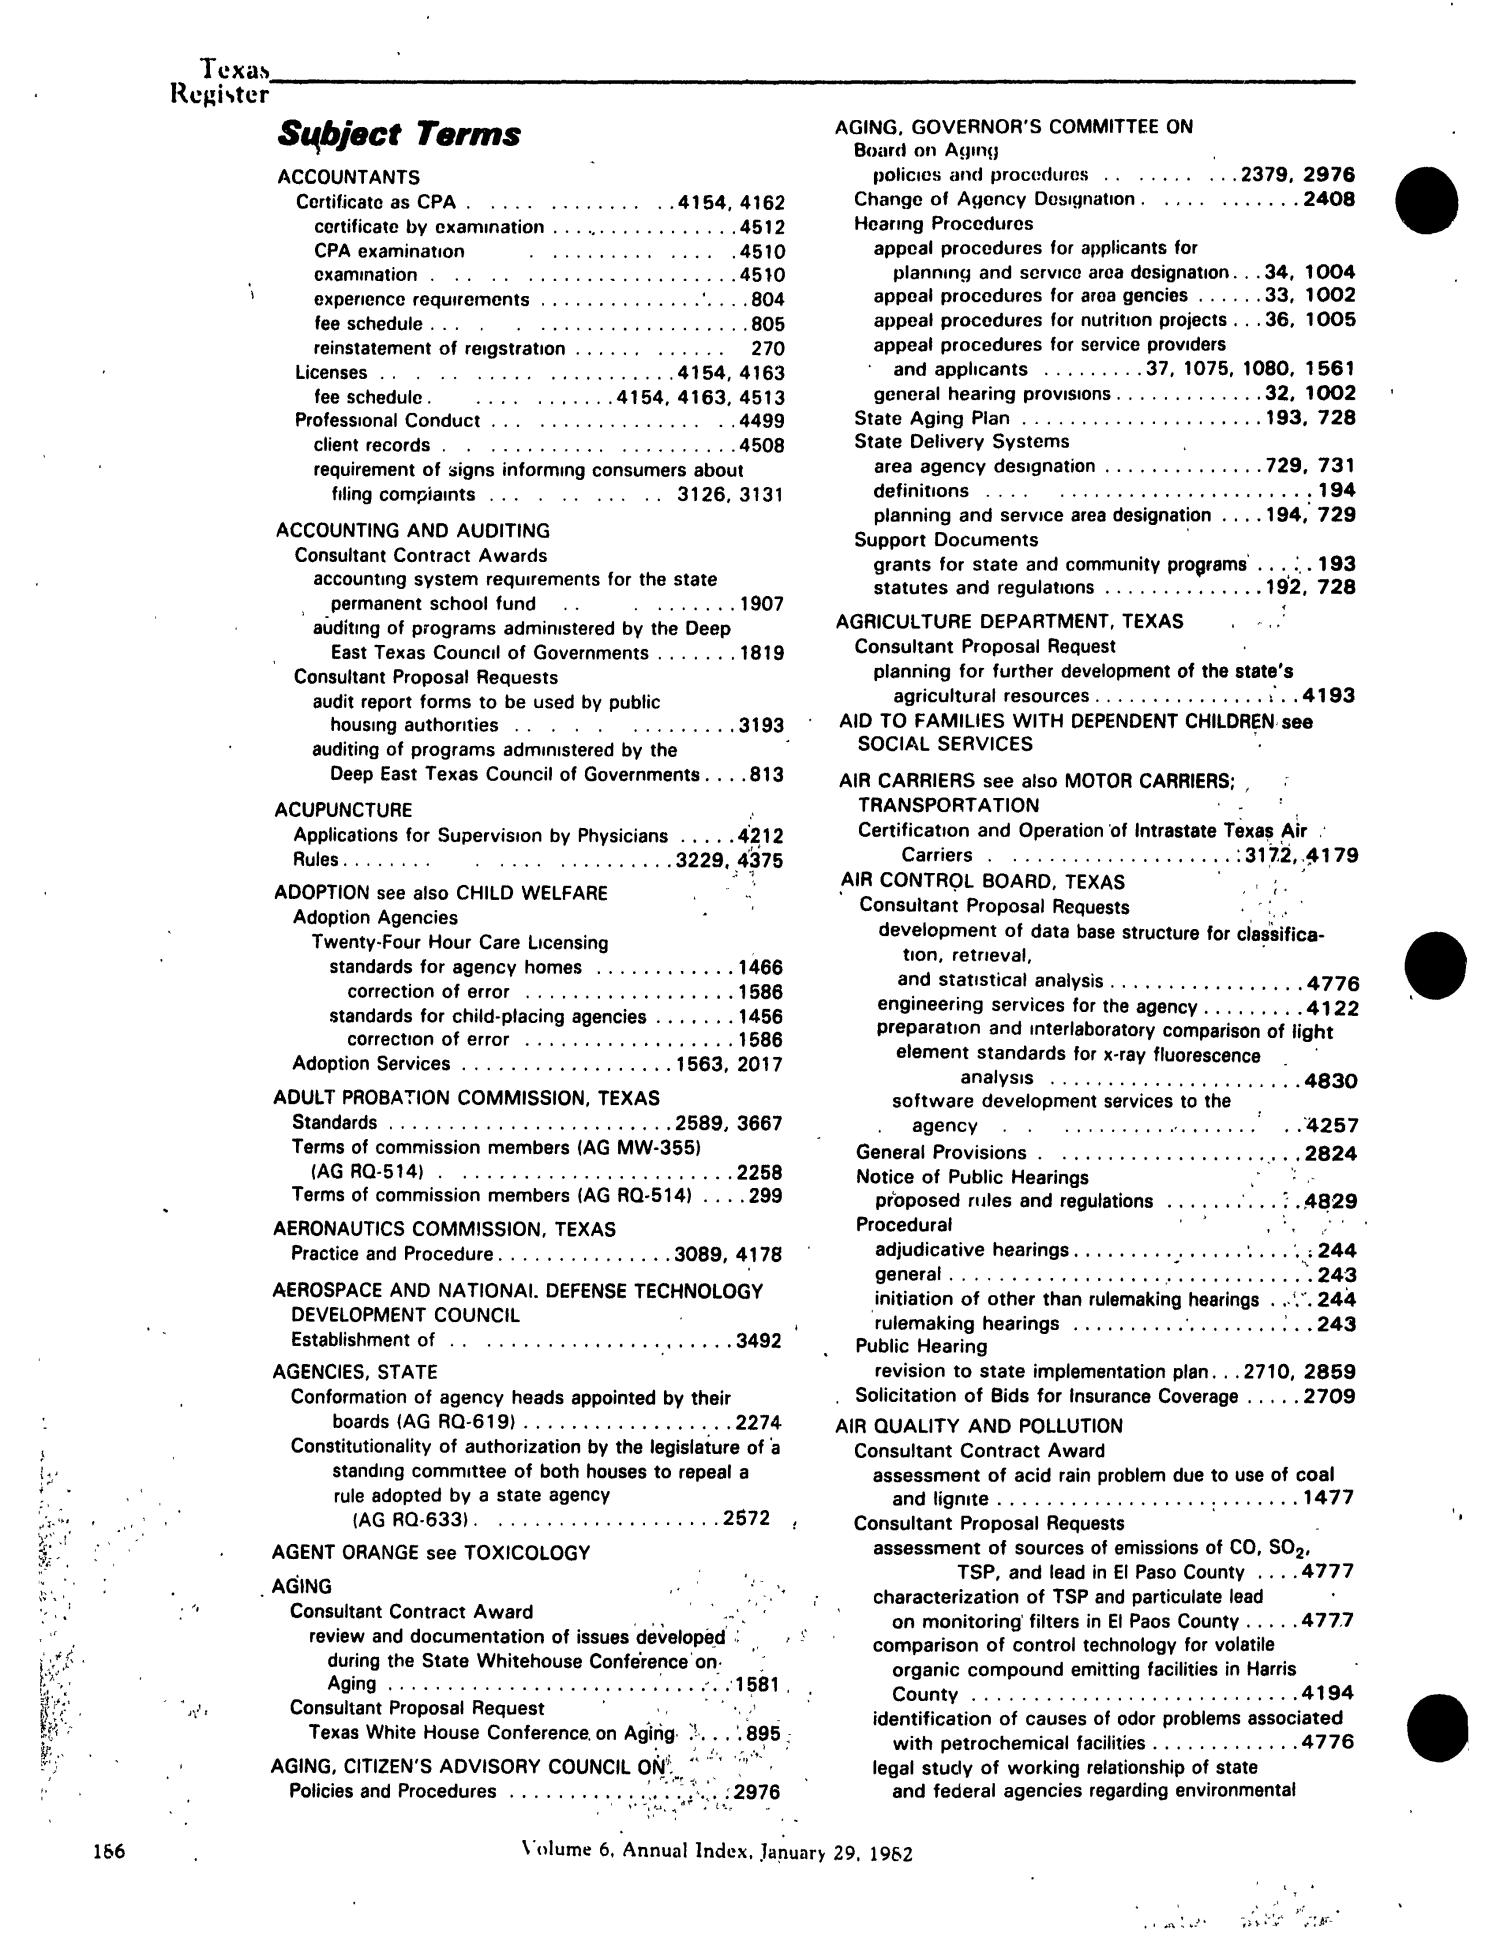 Texas Register, Volume 6, Annual Index, Pages 137-235, January 29, 1981
                                                
                                                    186
                                                